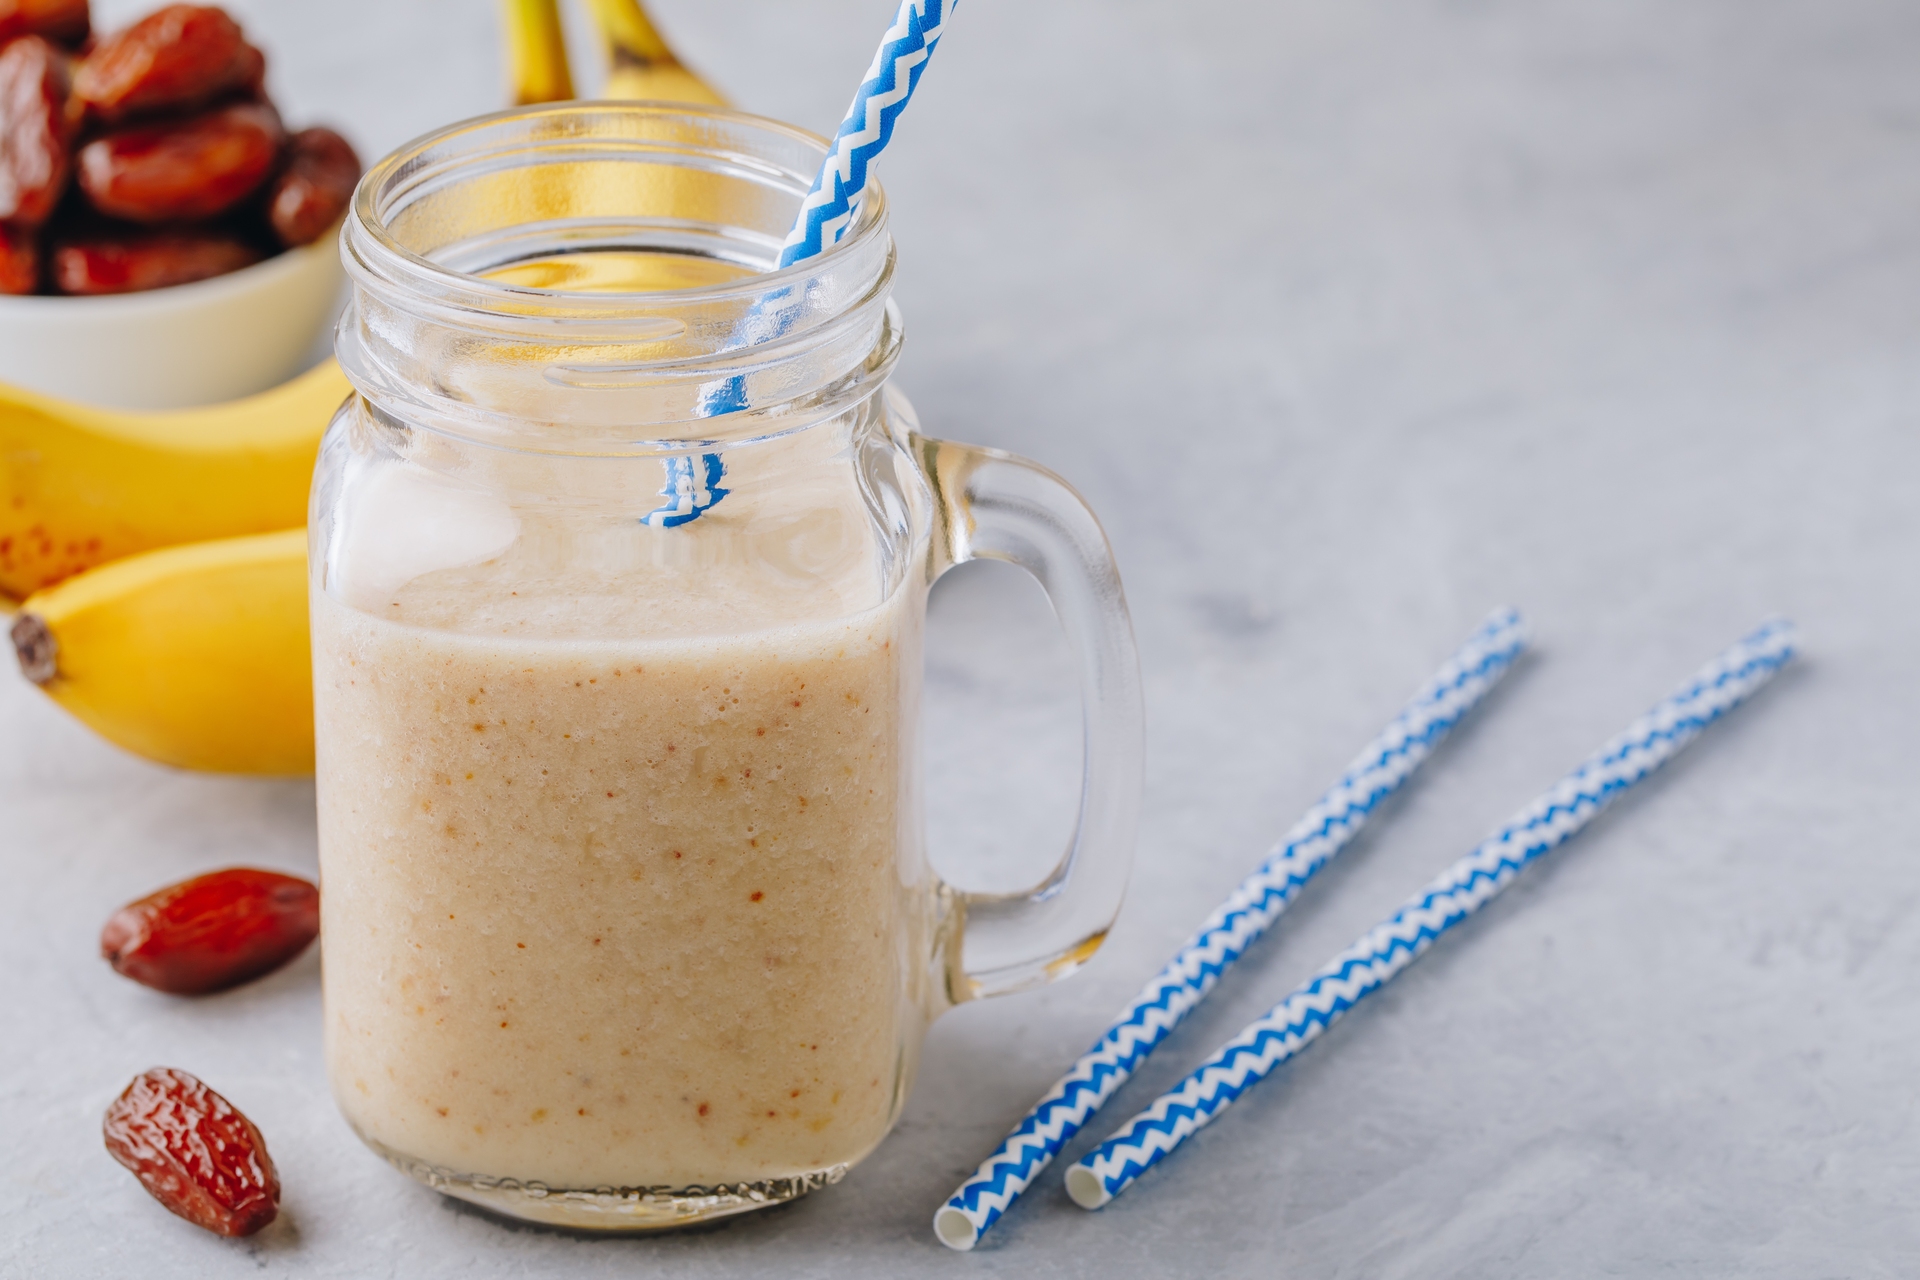 Banana Date Peanut Butter Smoothie for Losing Weight